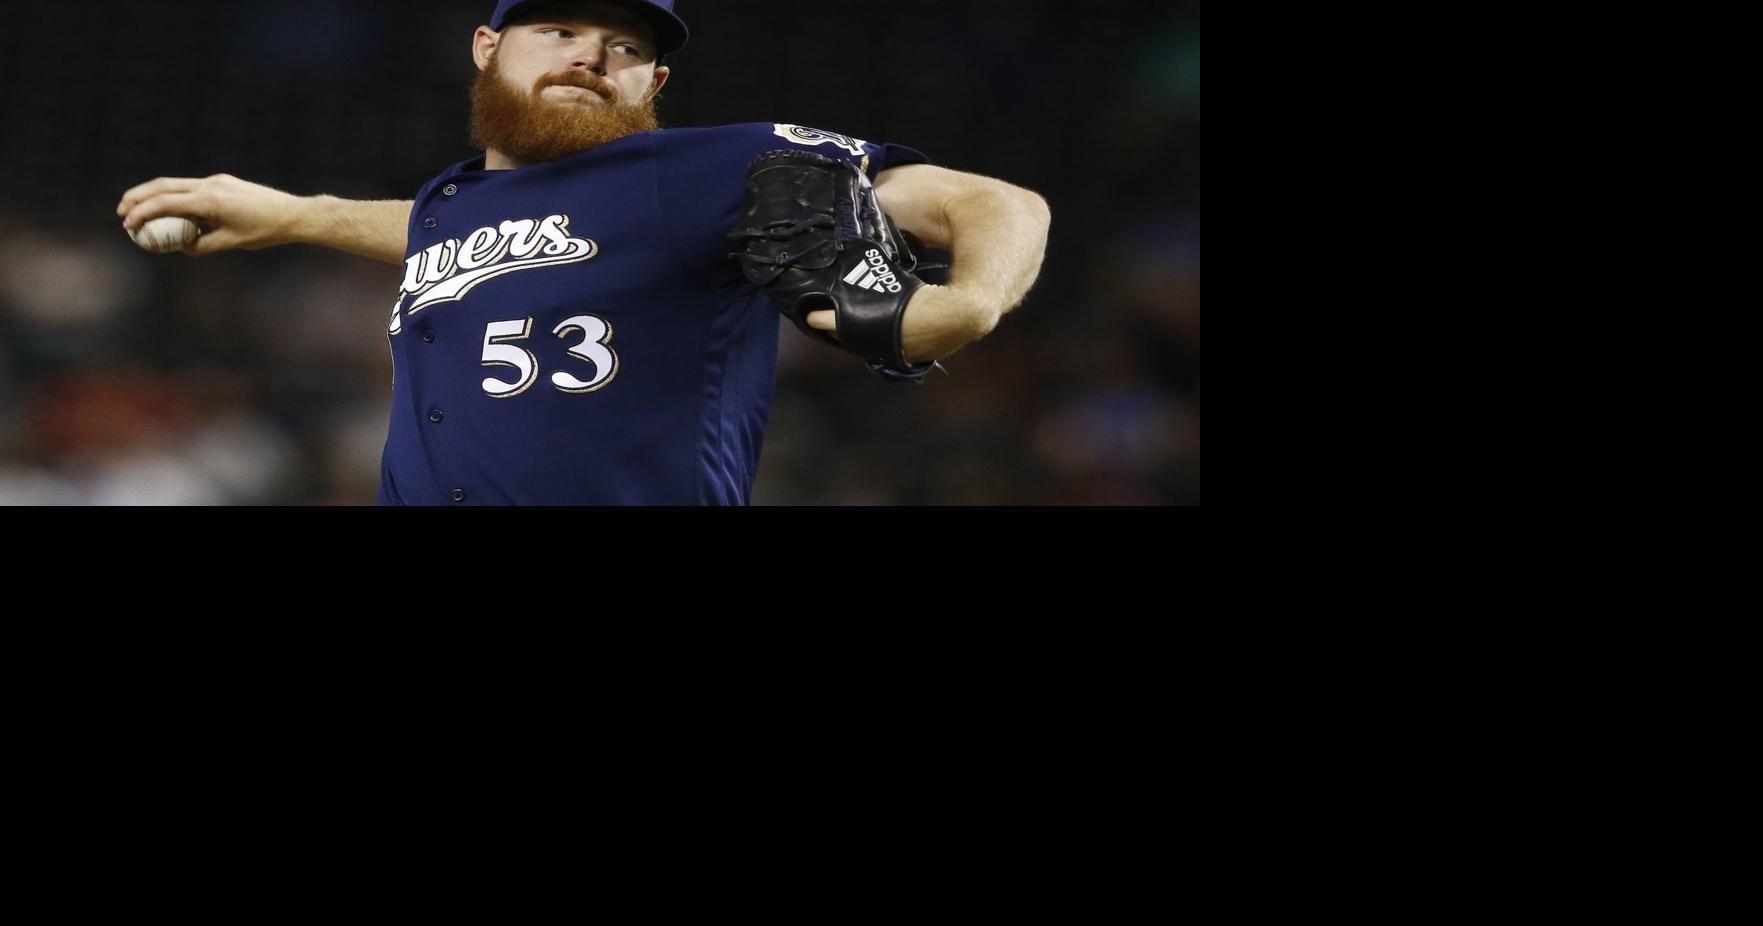 Brewers announce NLDS roster, carrying 11 pitchers and 15 bats